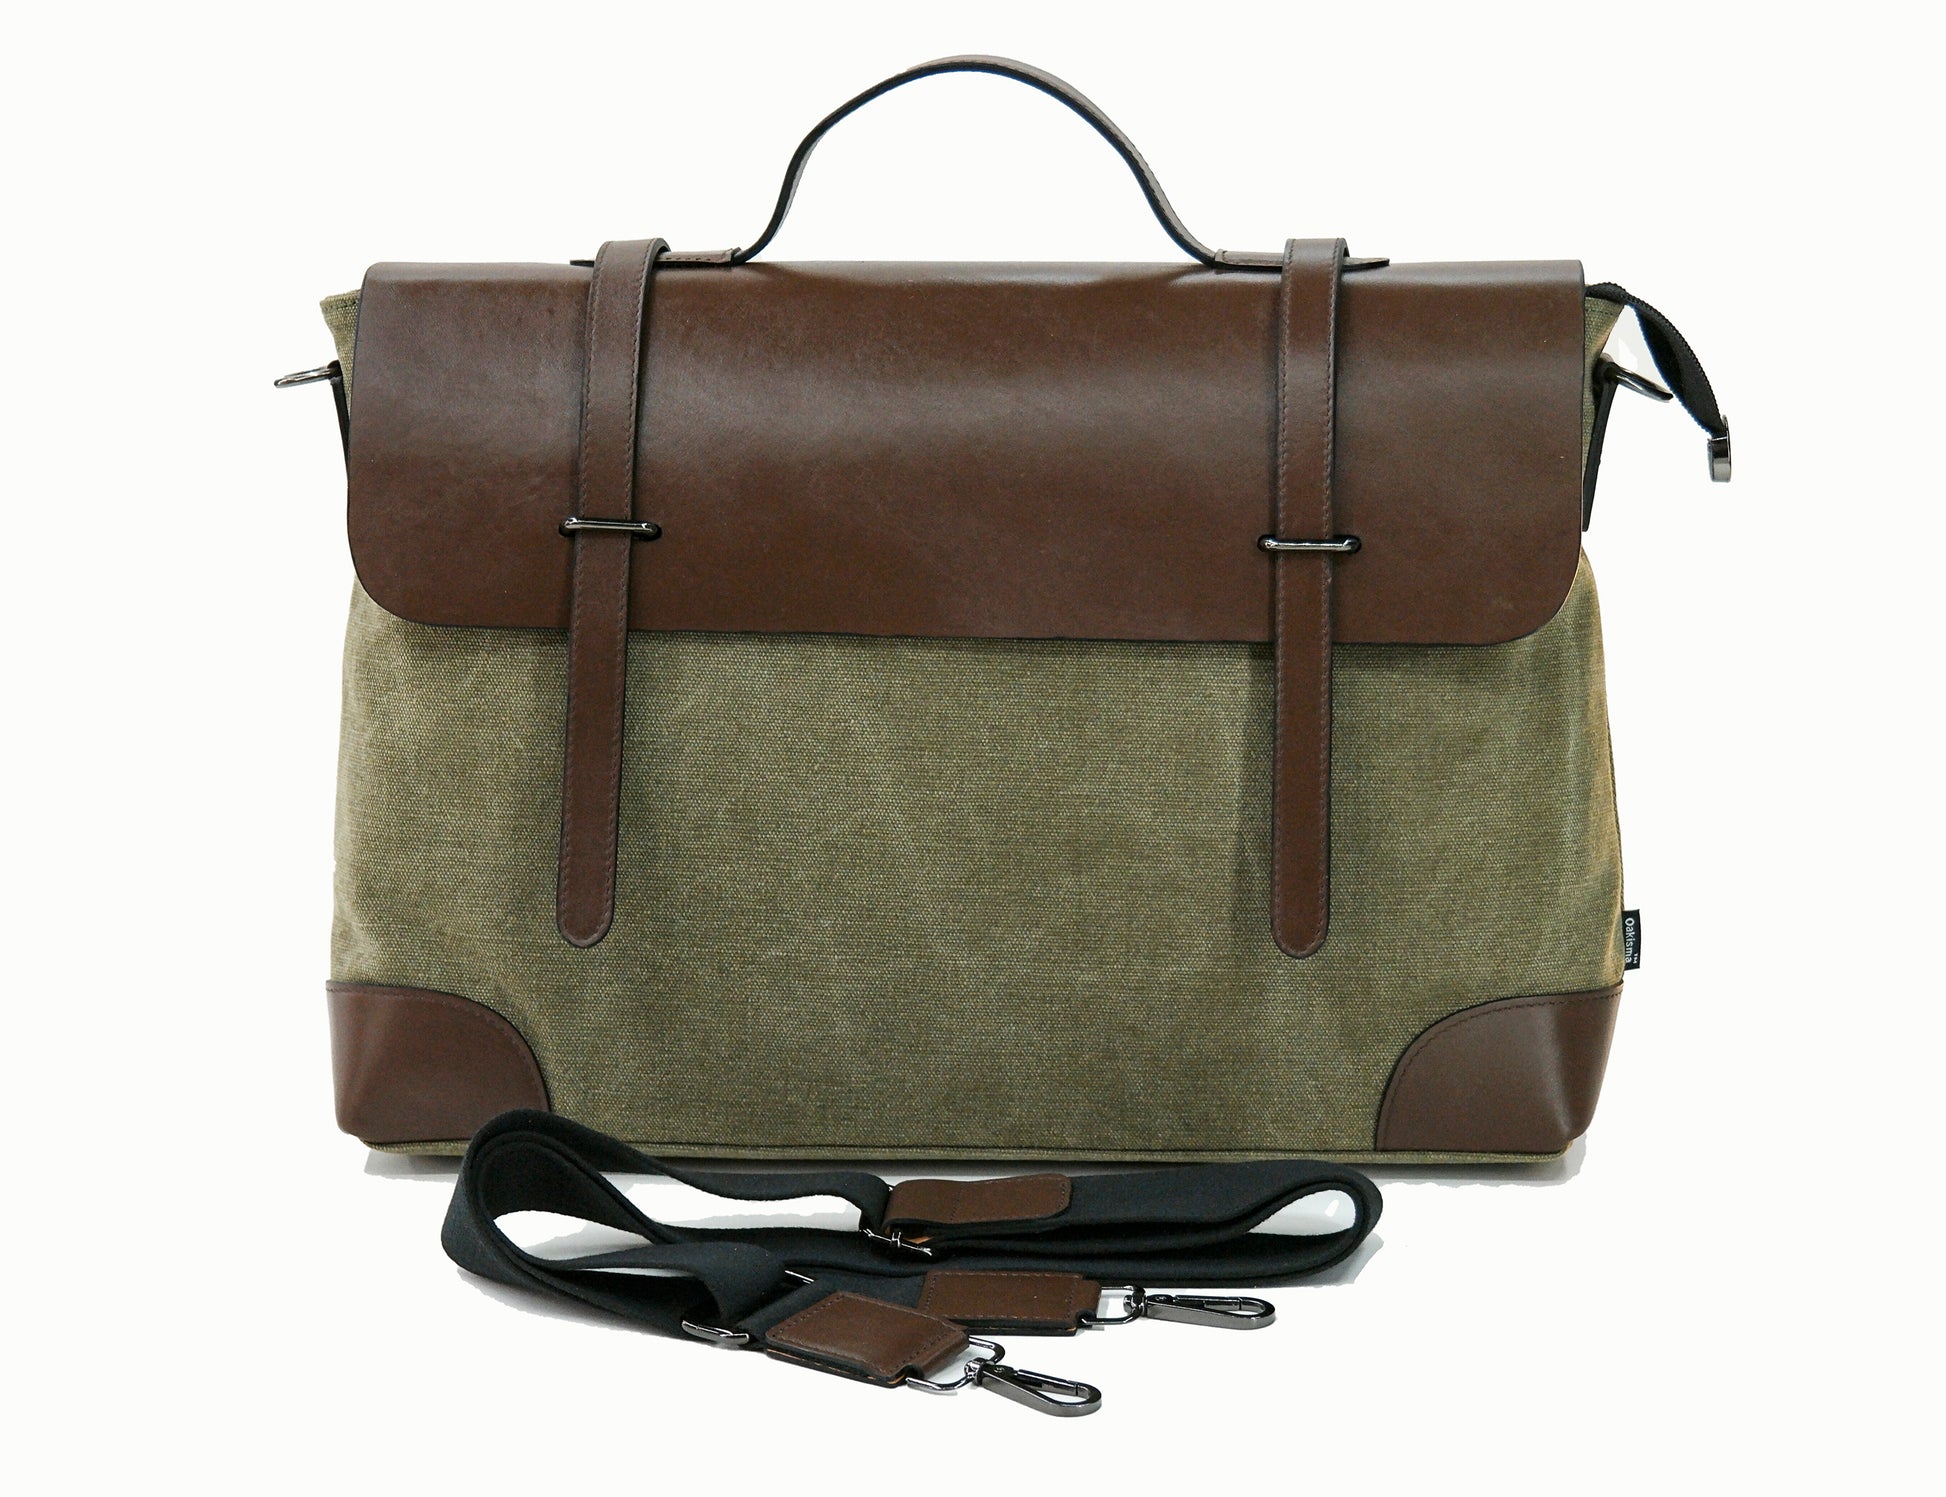 【Bag pattern】Making a Leather Canvas Bag/Postman's Bag Made of Canvas and Cowhide